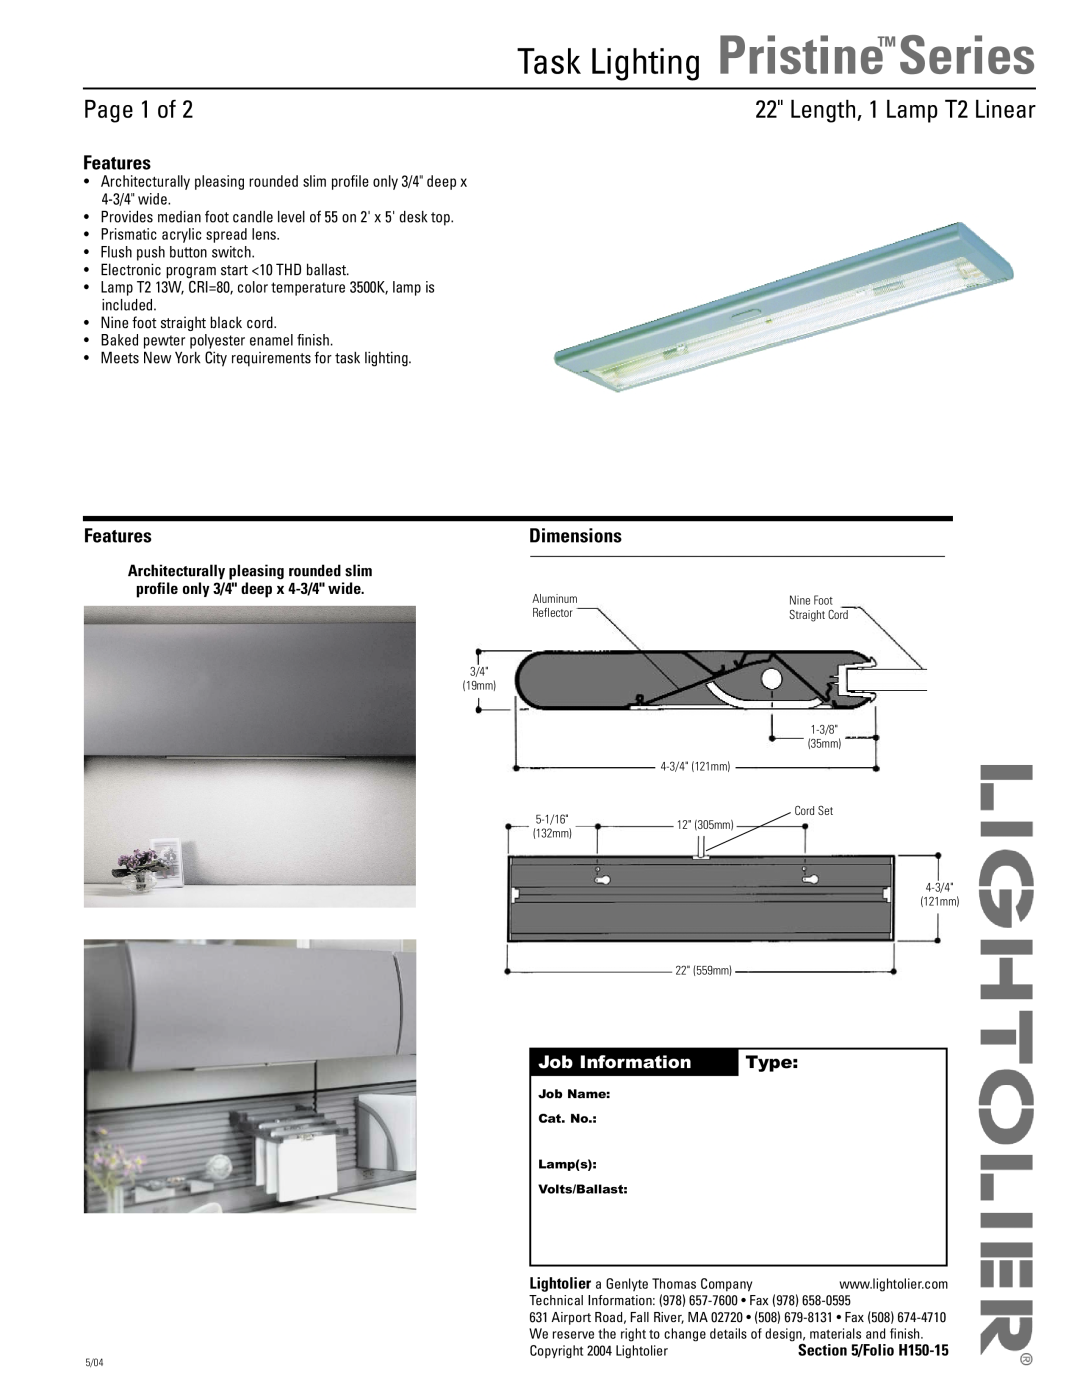 Lightolier Pristine Series dimensions Task Lighting PristineTM Series, Page 1 of, Length, 1 Lamp T2 Linear, Features, Type 